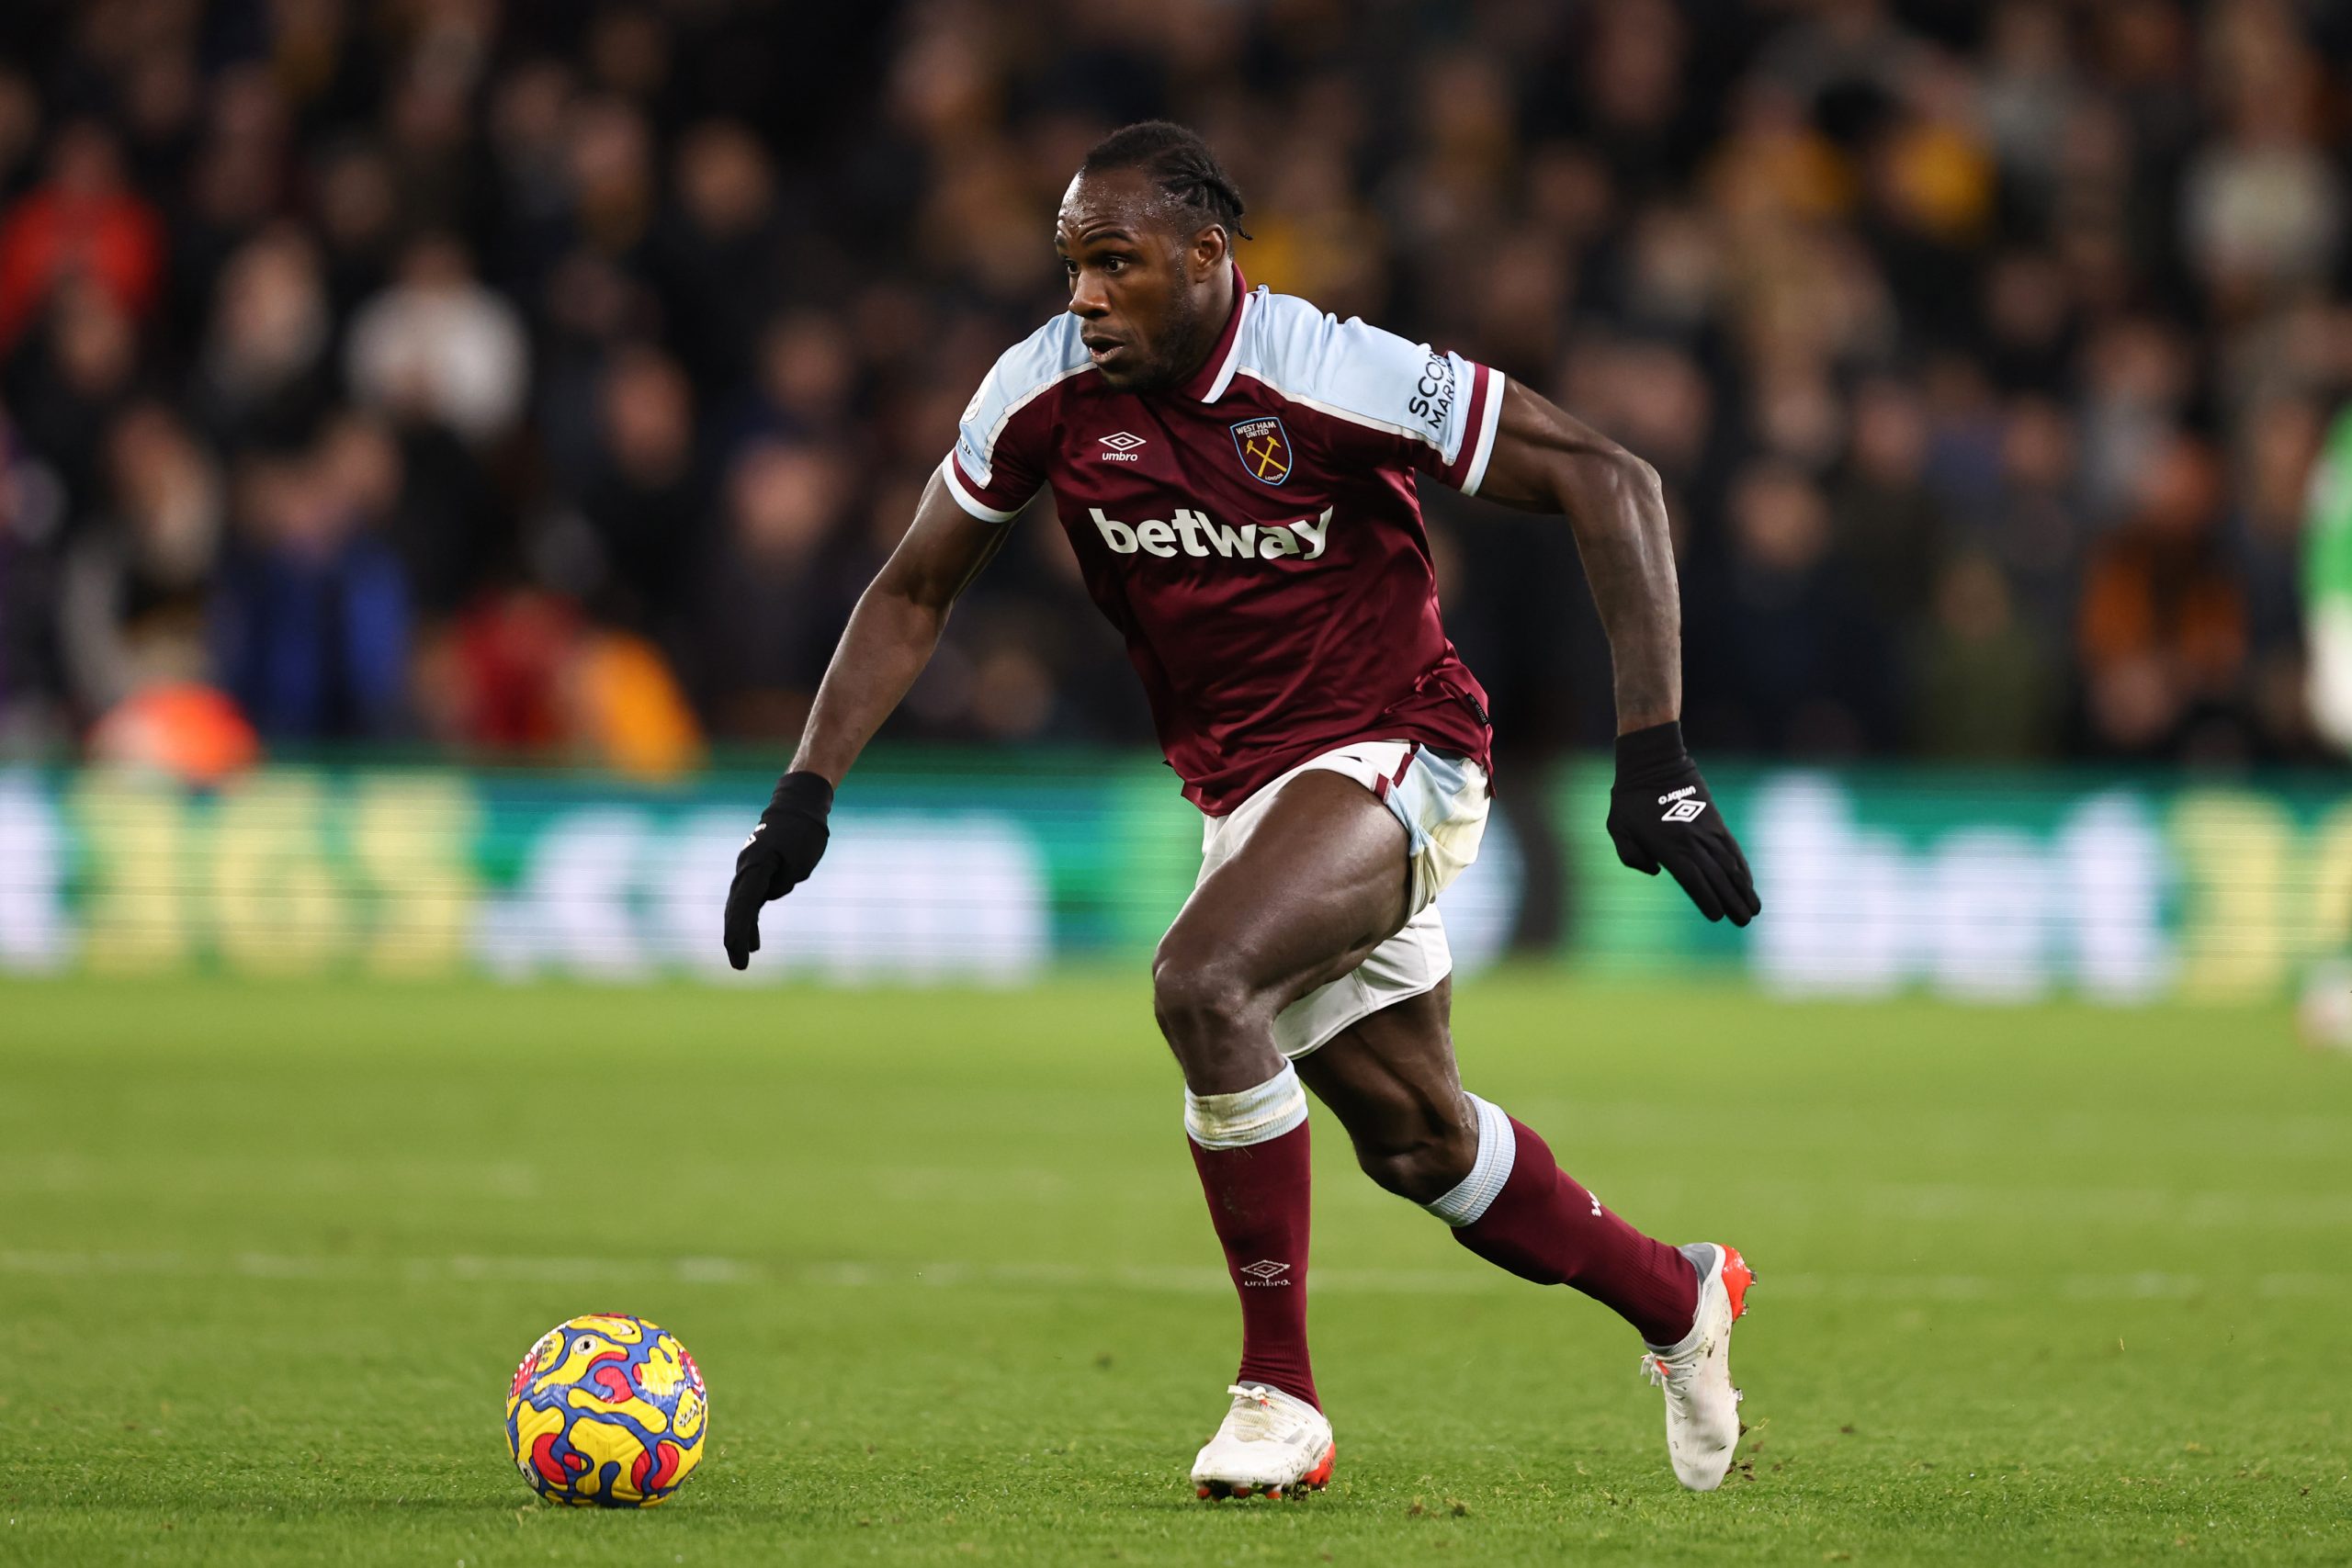 WOLVERHAMPTON, ENGLAND - NOVEMBER 20:  Michail Antonio of West Ham United during the Premier League match between Wolverhampton Wanderers and West Ham United at Molineux on November 20, 2021 in Wolverhampton, England. (Photo by Marc Atkins/Getty Images)The 4th Official uses images provided by the following image agency: Getty Images (https://www.gettyimages.de/) Imago Images (https://www.imago-images.de/)